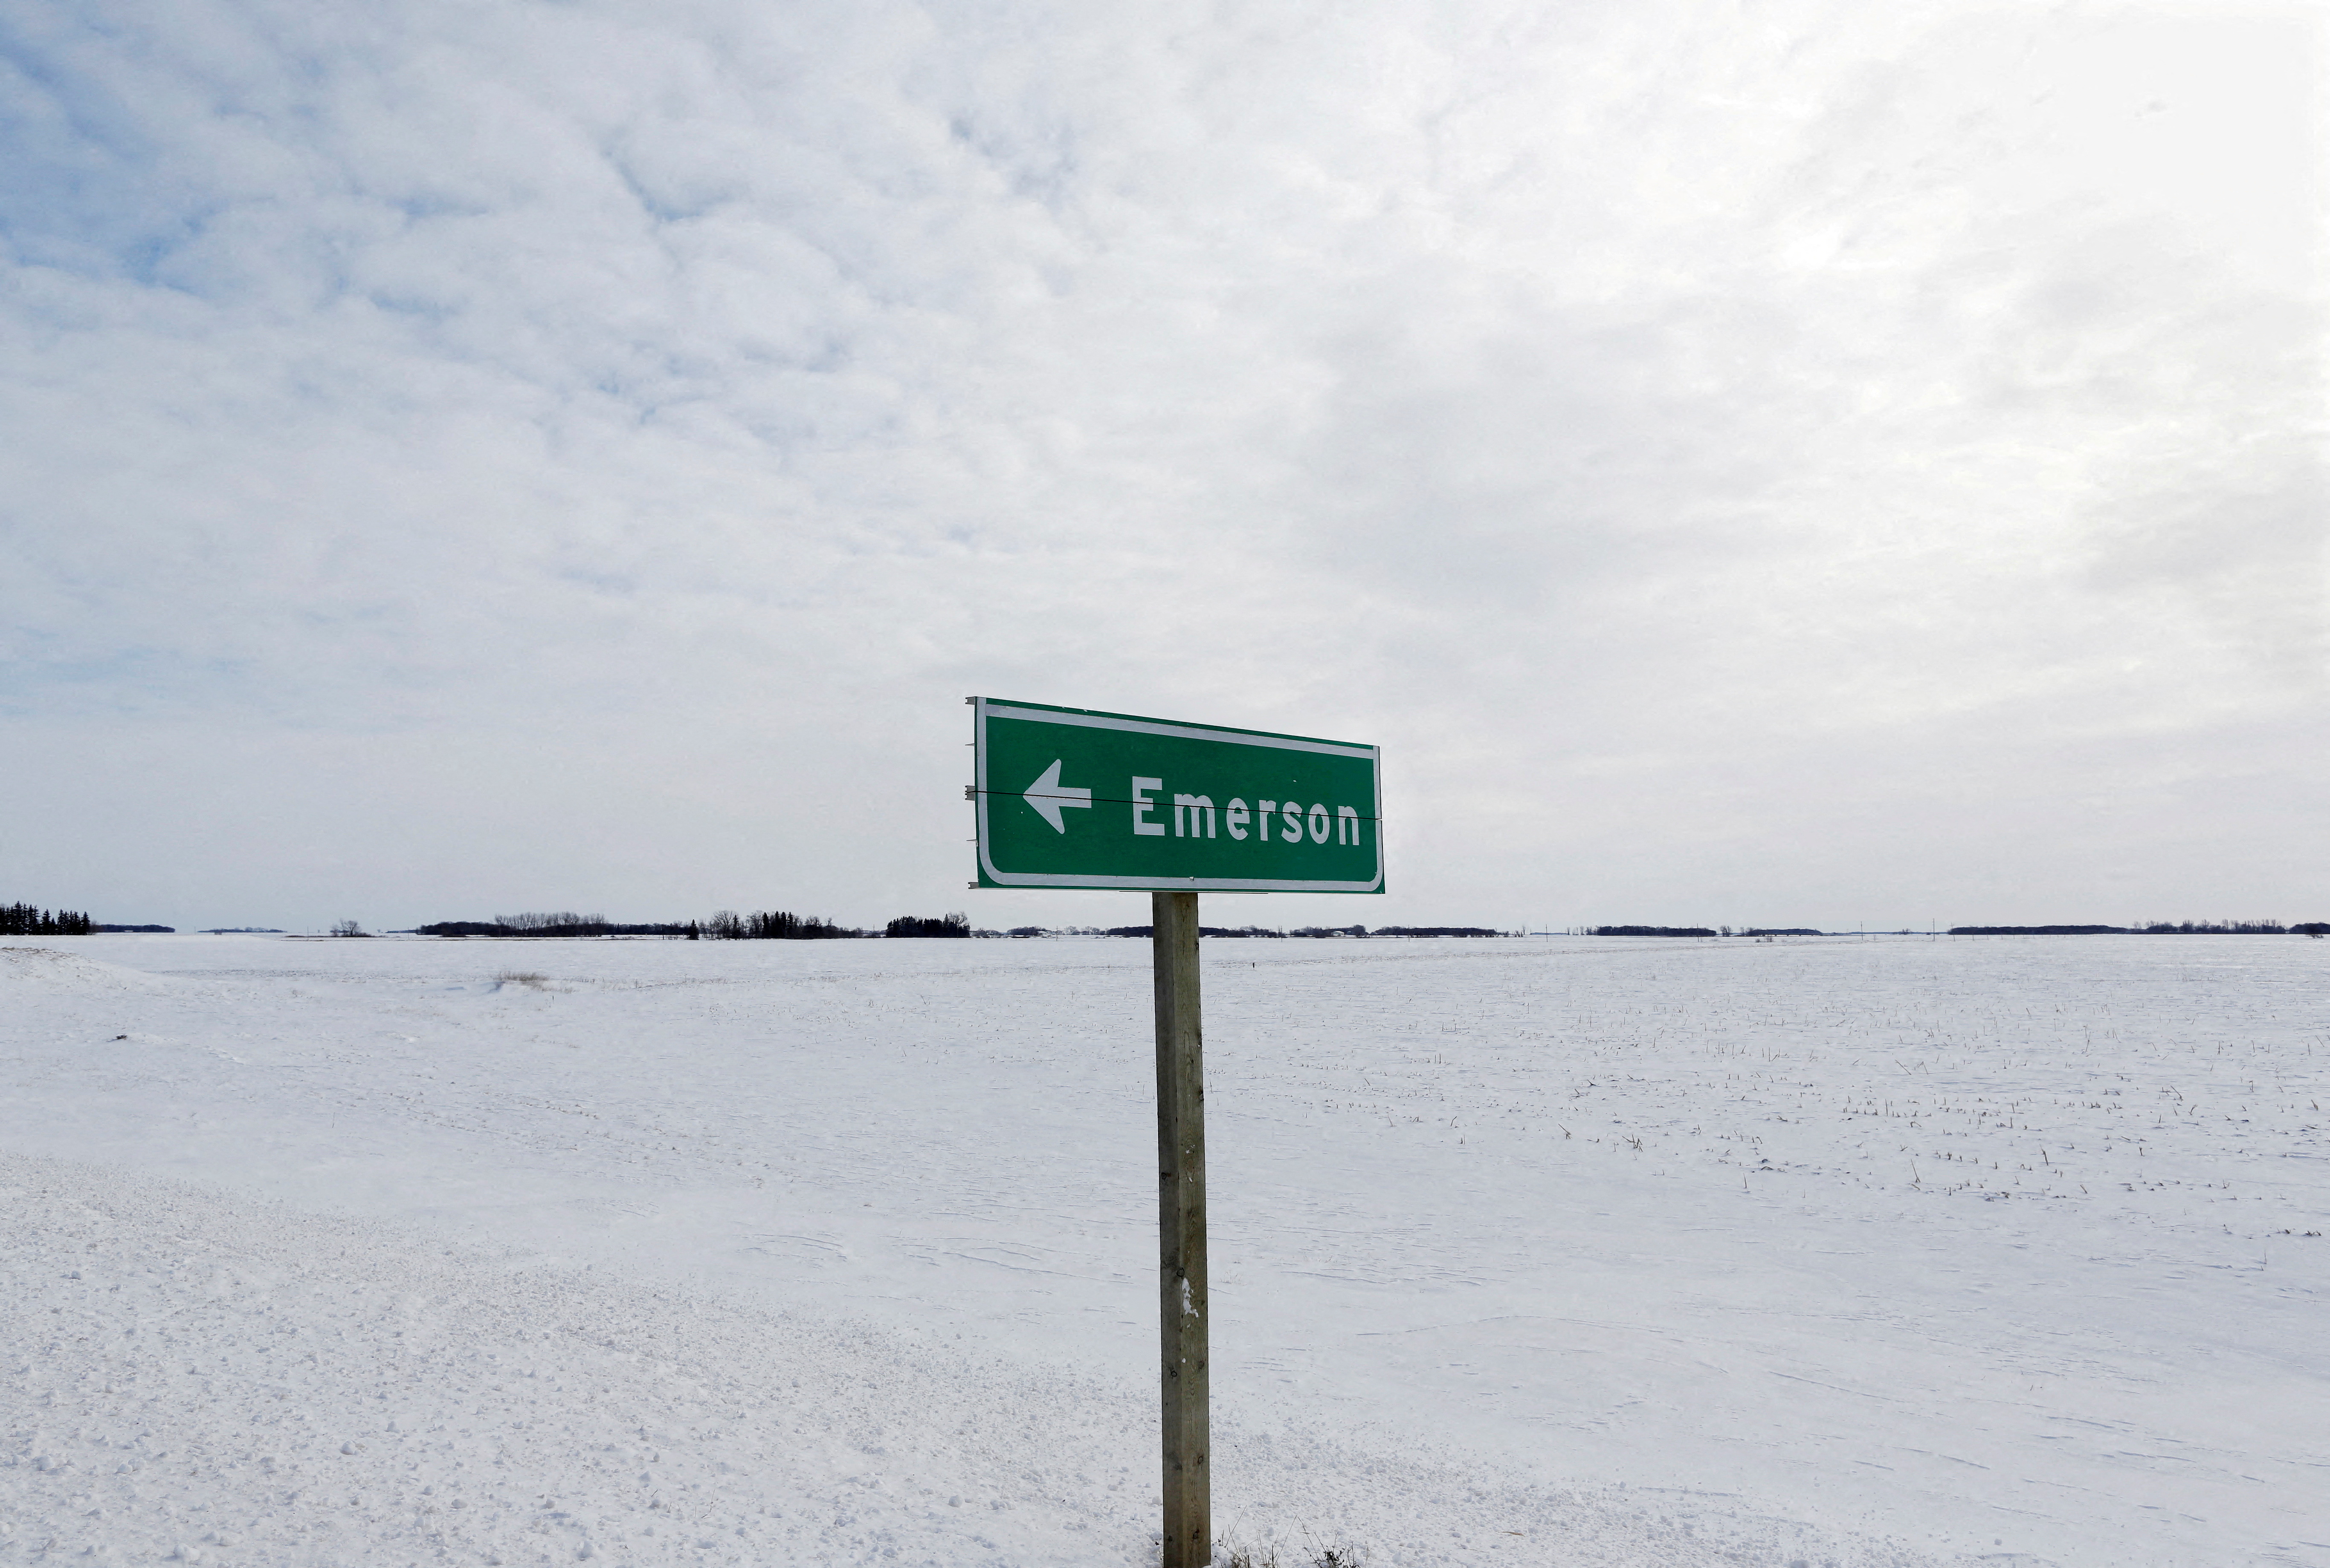 A sign post for the small border town of Emerson, near the Canada-U.S border crossing